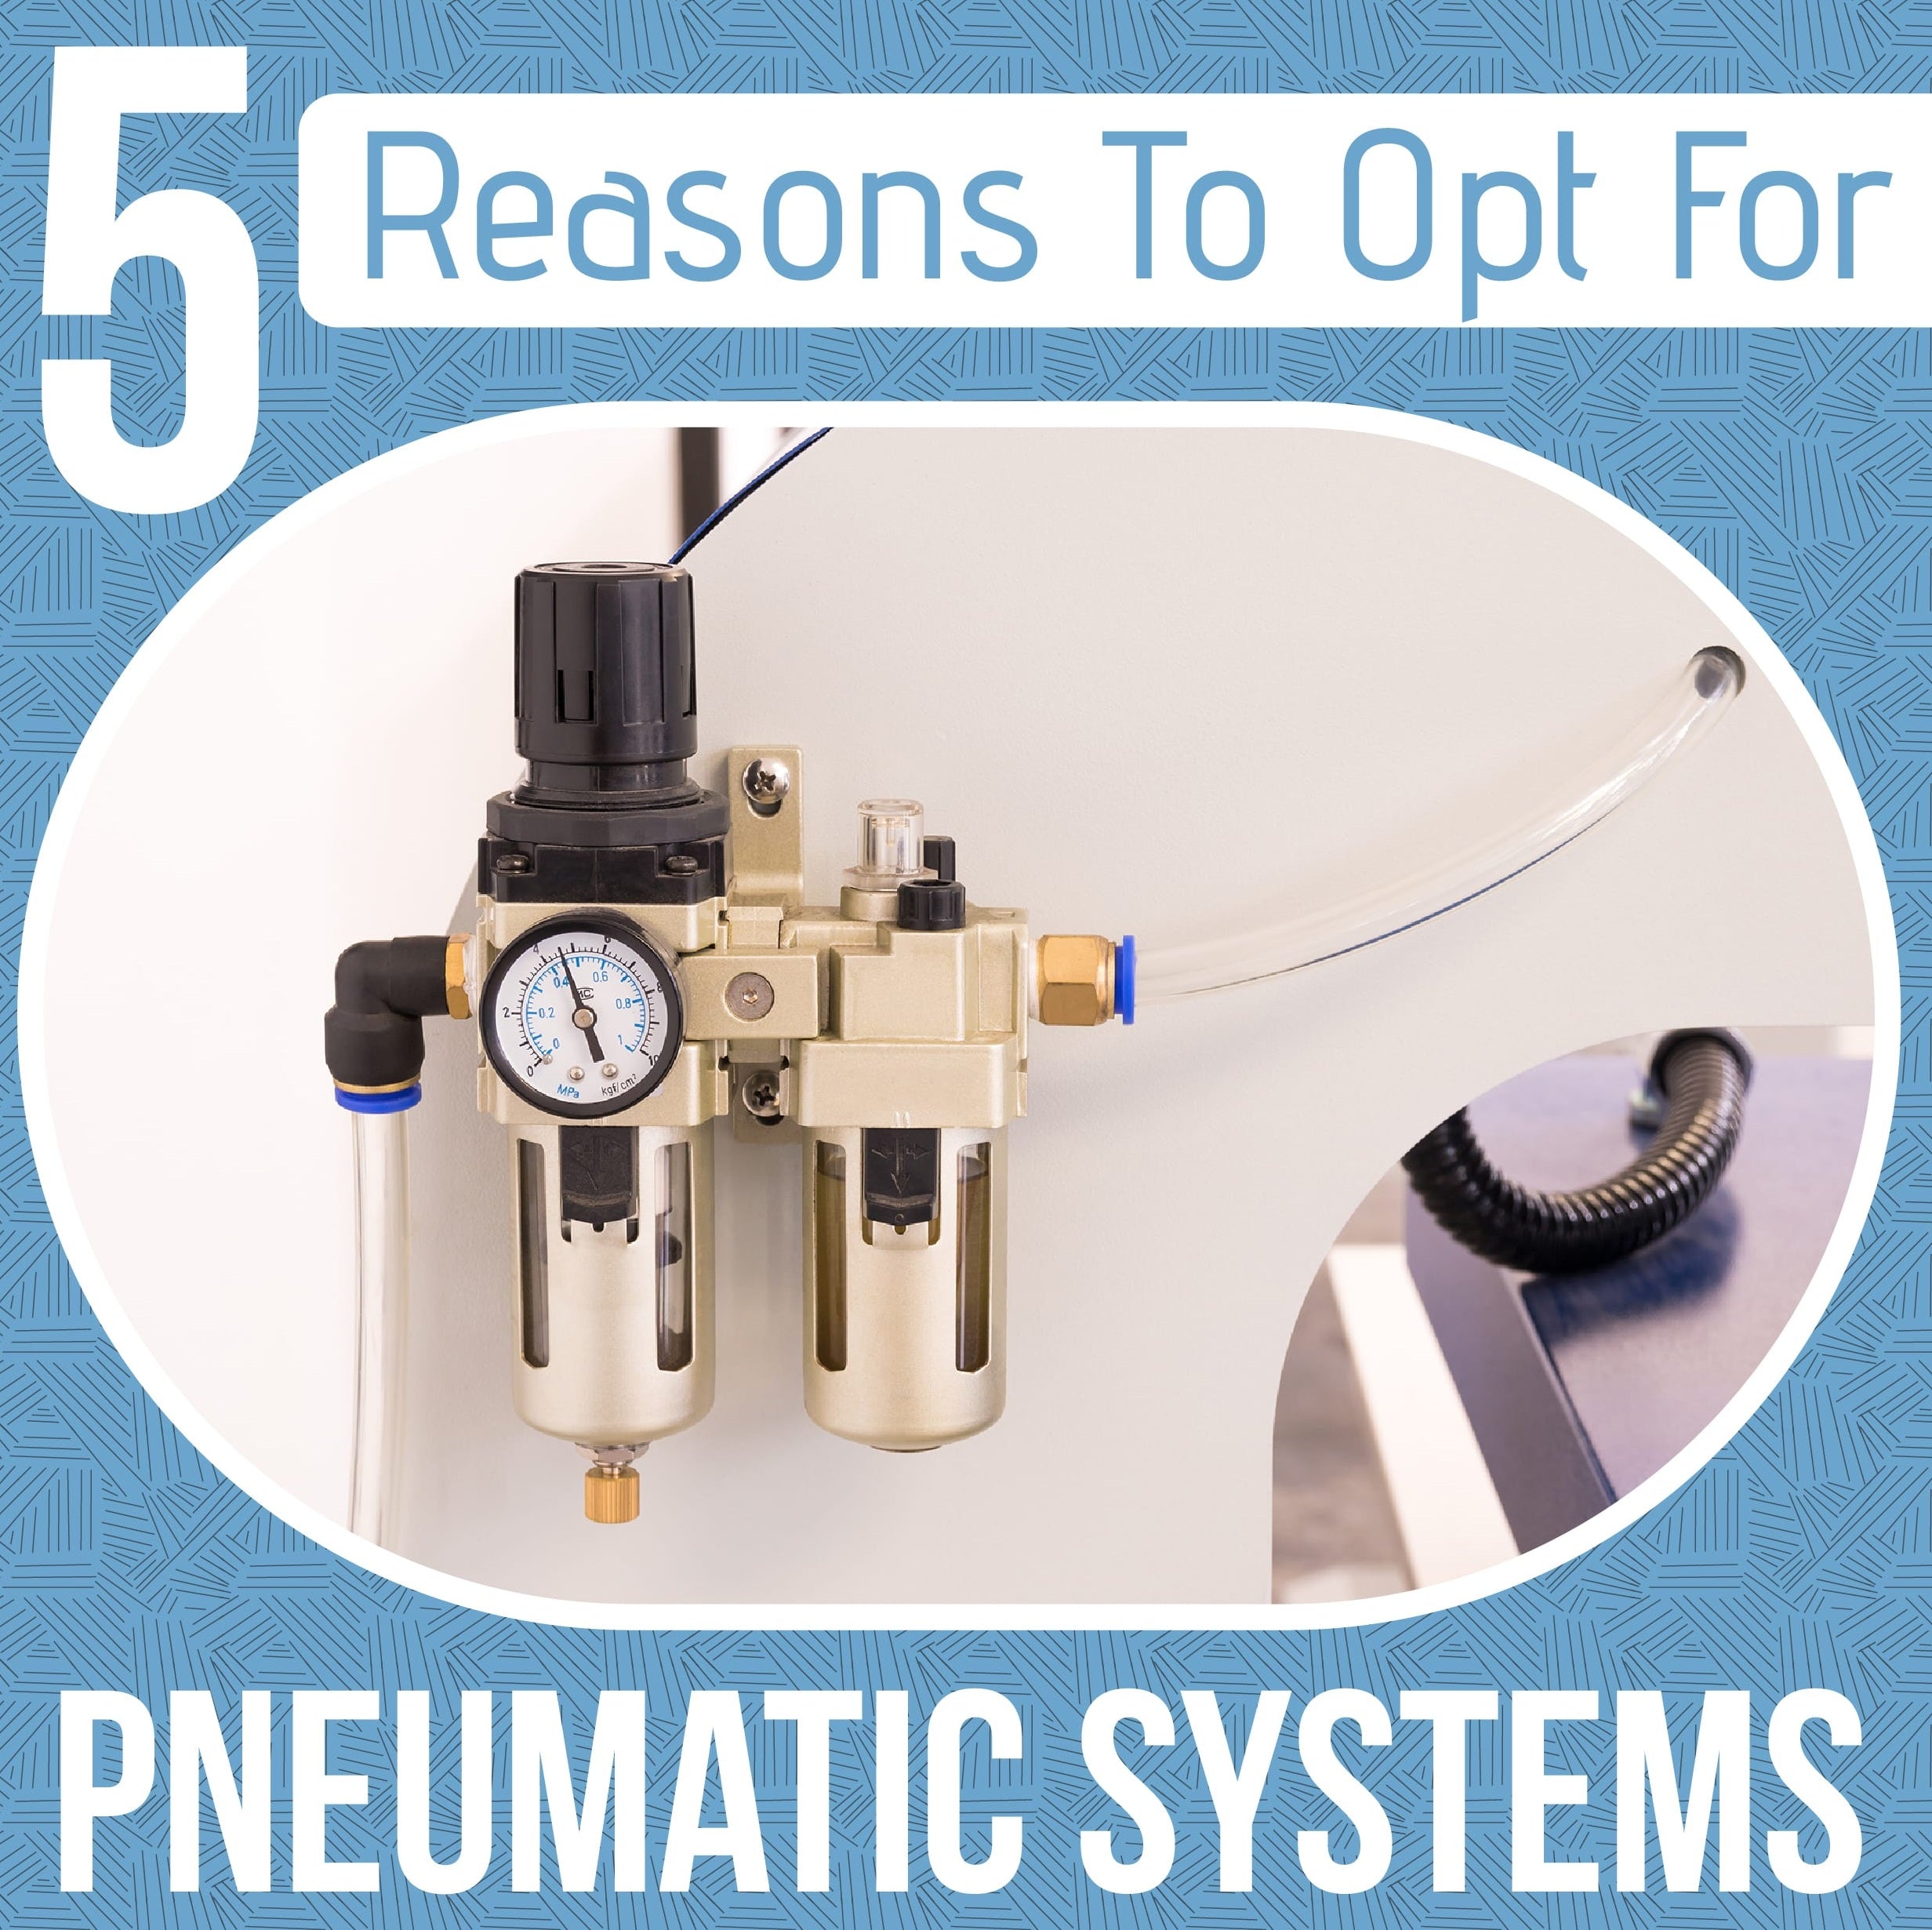 5 Reasons To Opt For Pneumatic Systems